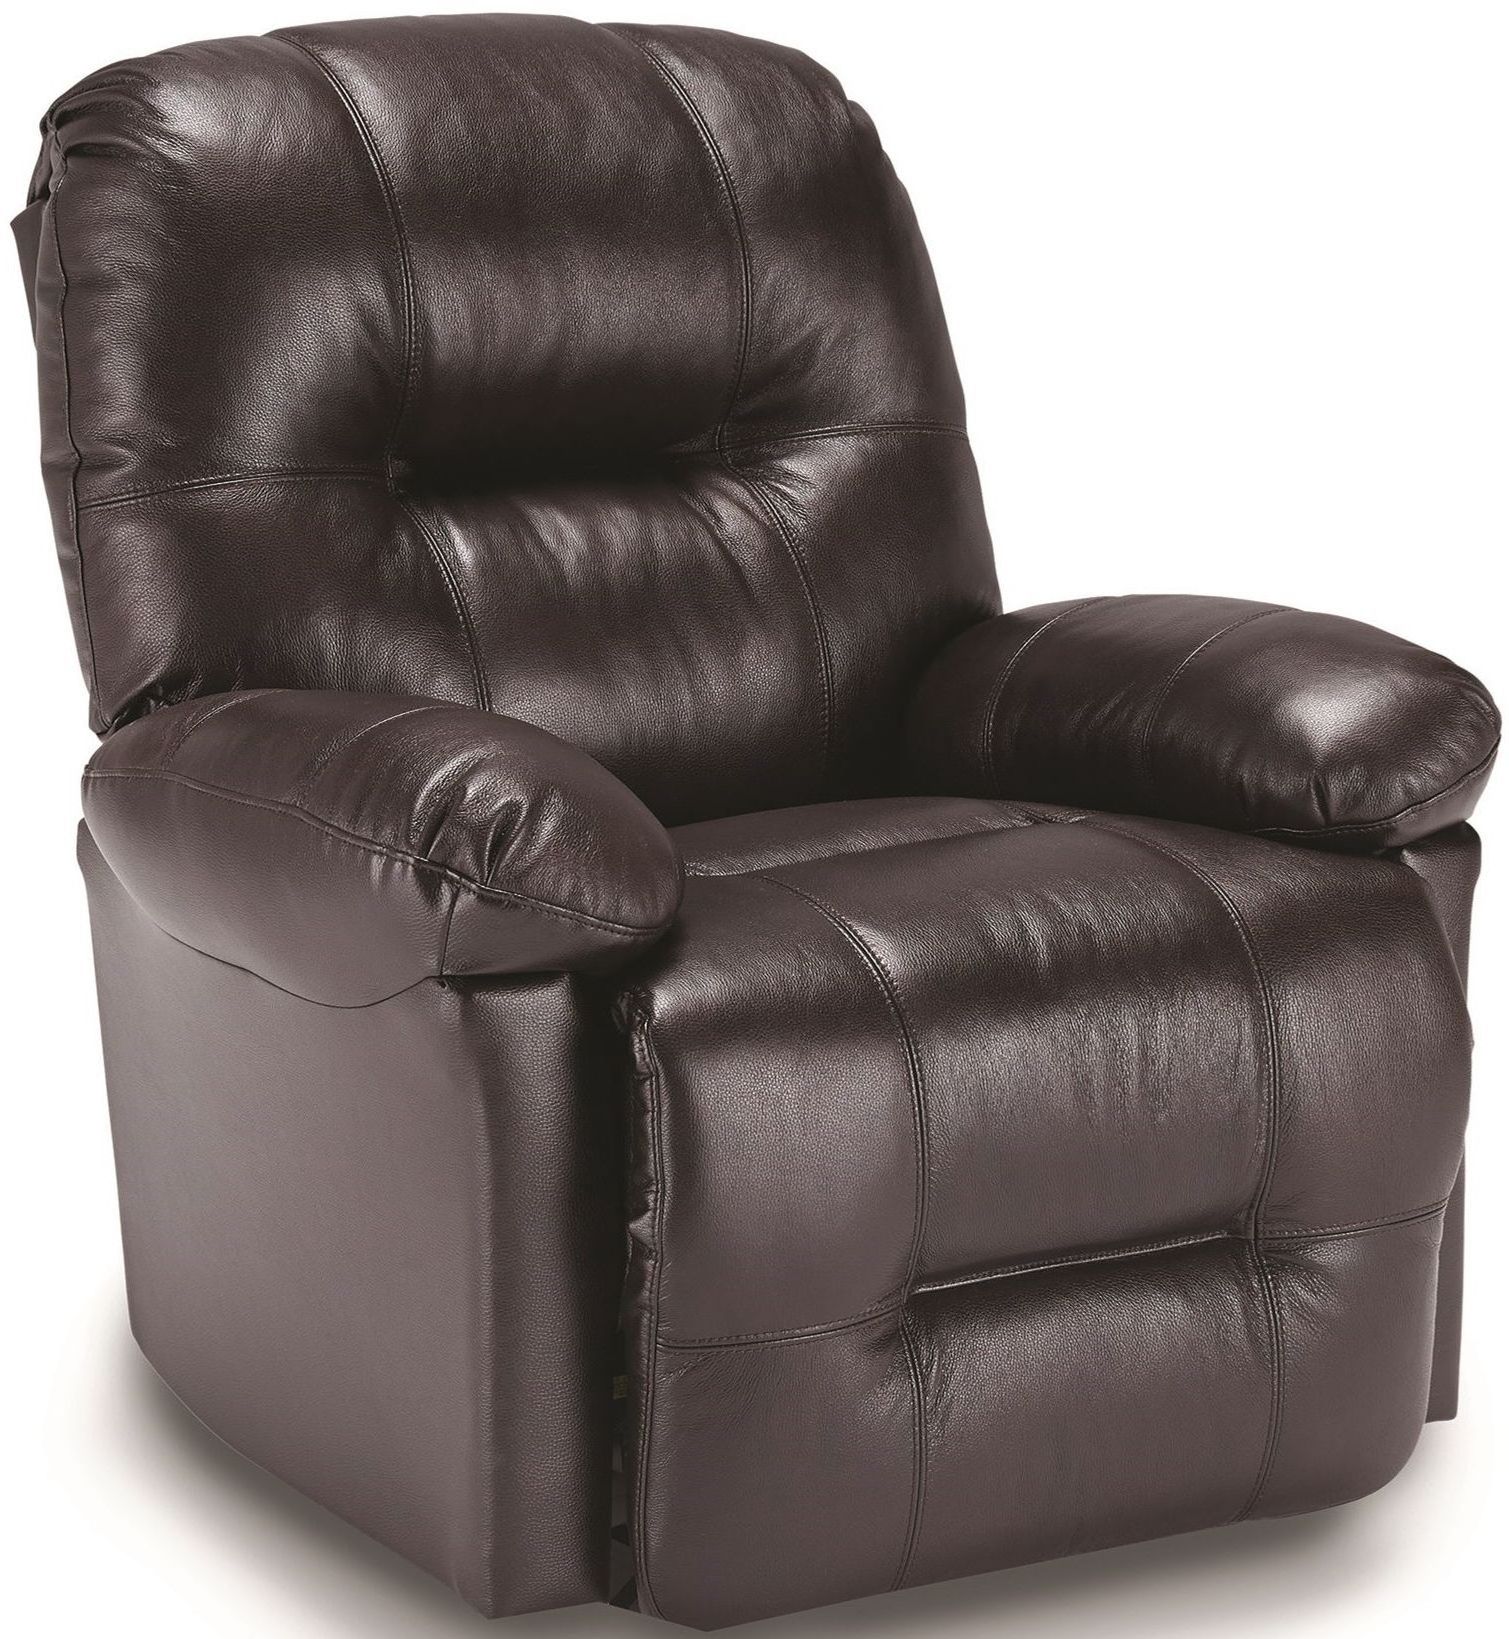 Best™ Home Furnishings Zaynah Power Space Saver® Recliner